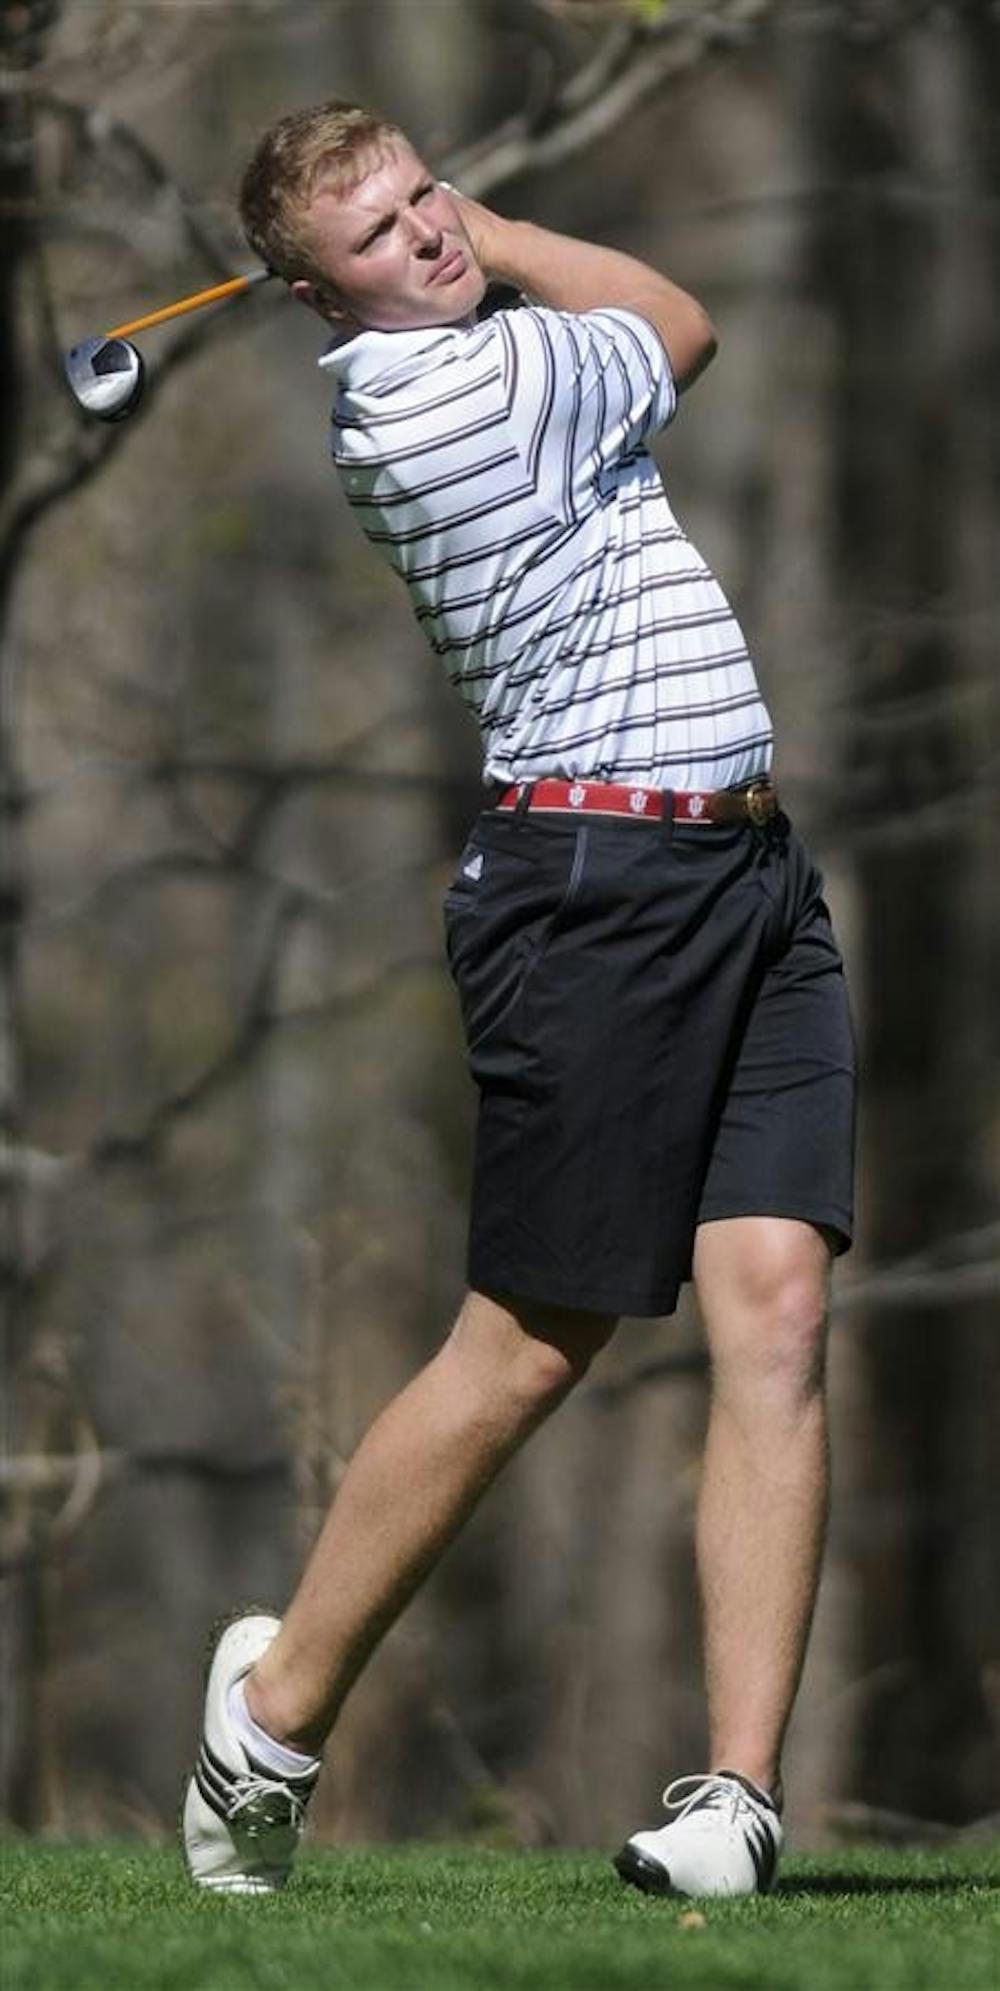 Then-junior David Erdy watches his shot from the ninth tee during the adidas Hoosier Invitational on April 11 at the IU Golf Course.